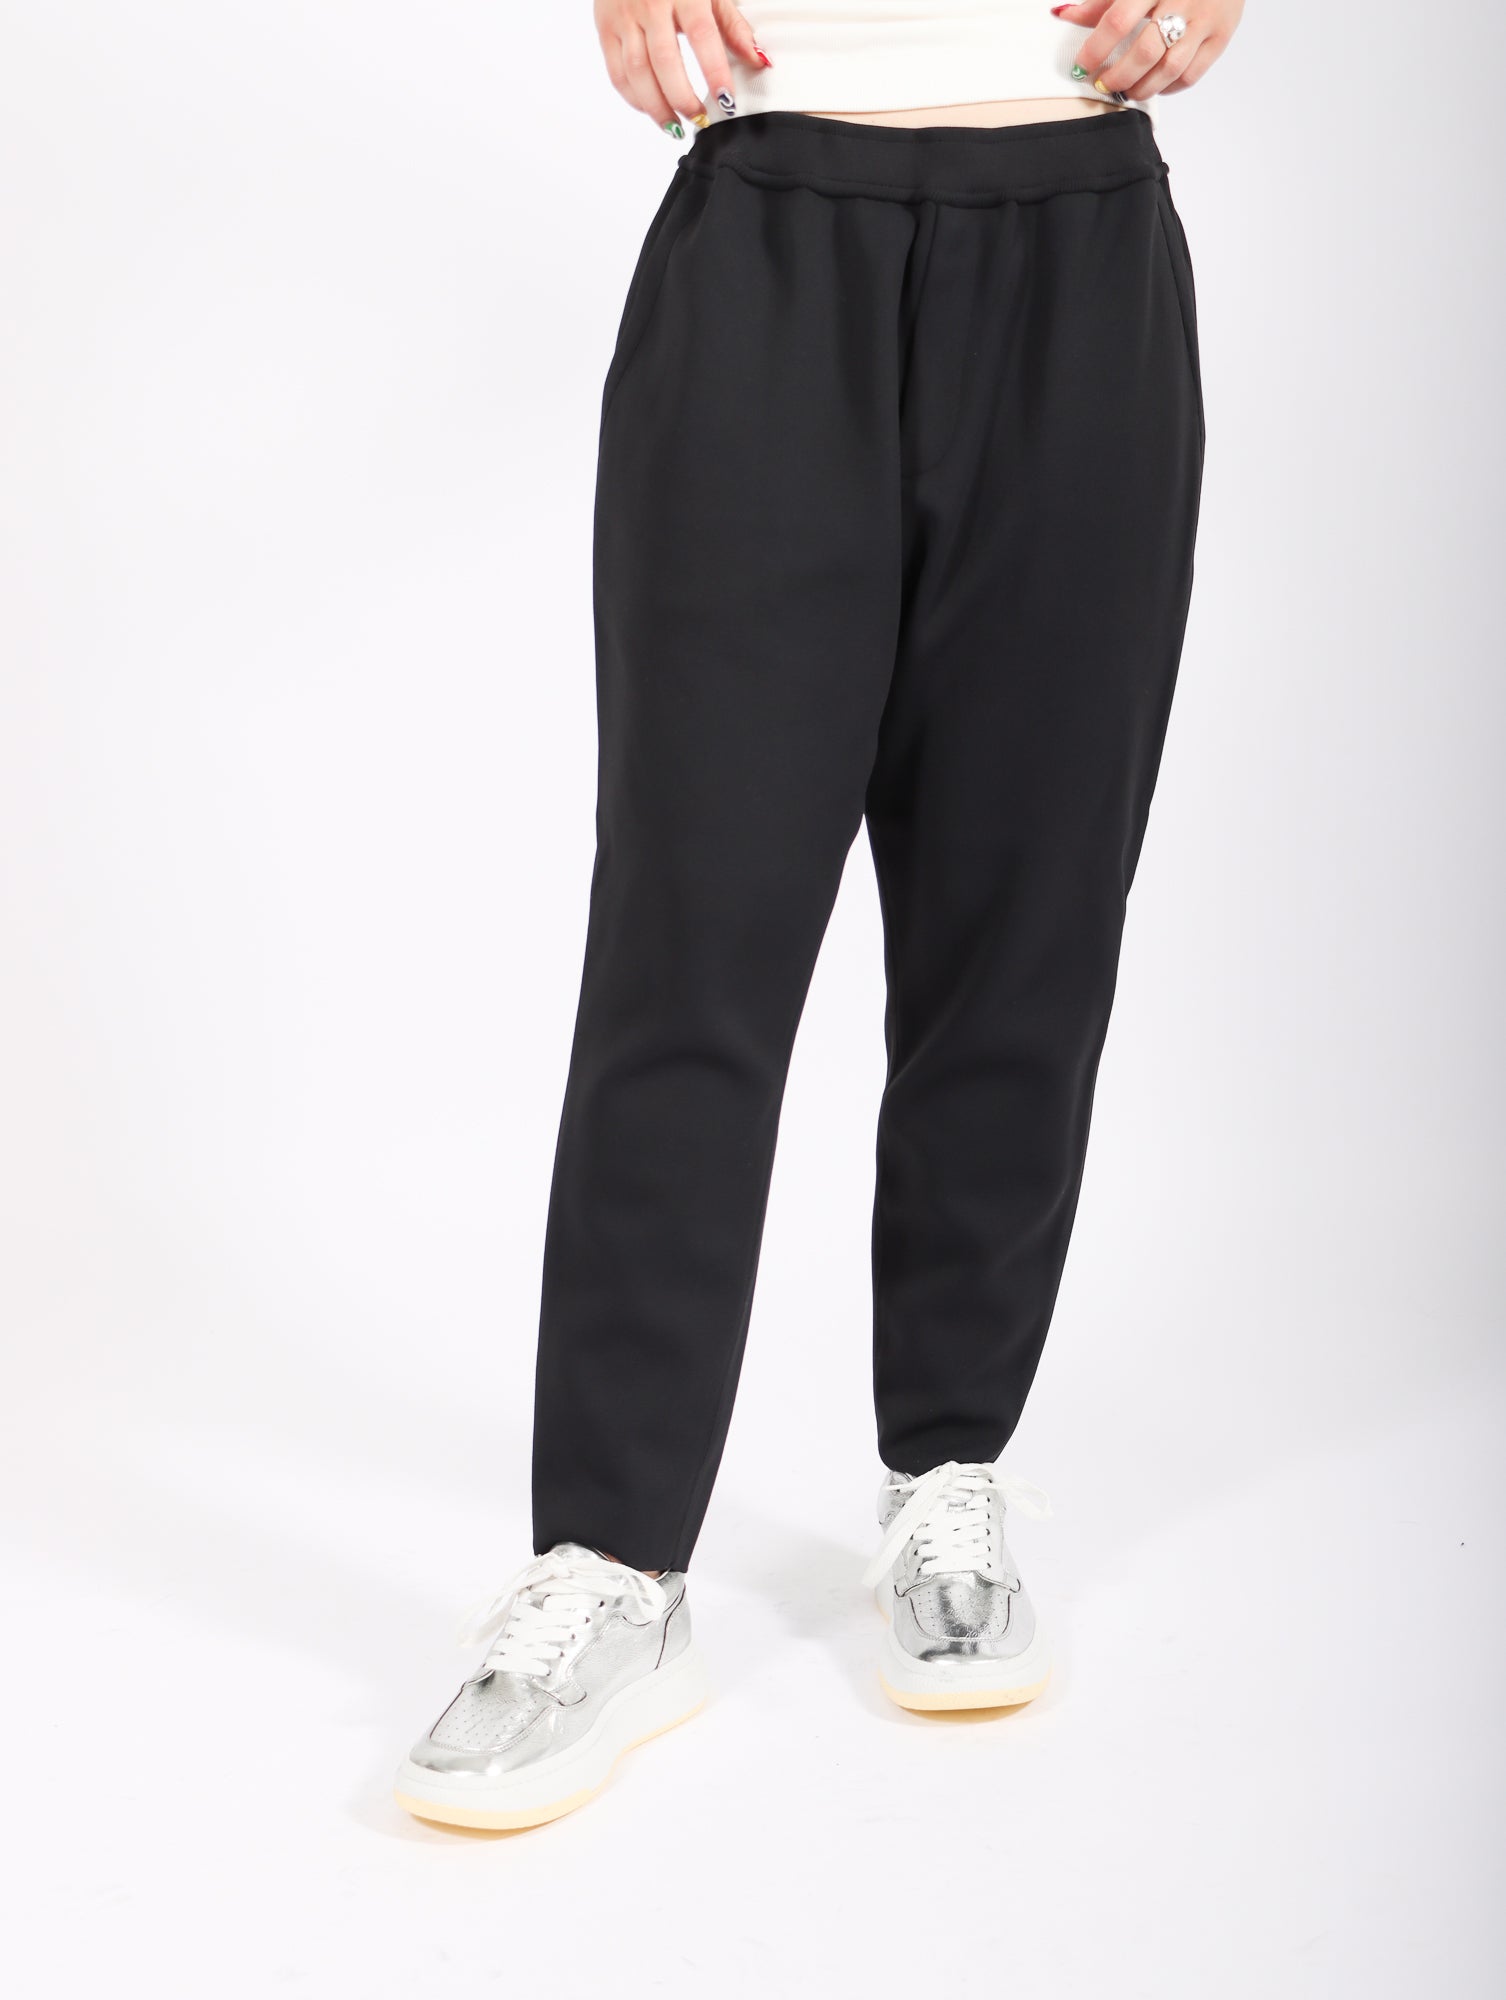 Milan Tapered Pants in Black by CFCL